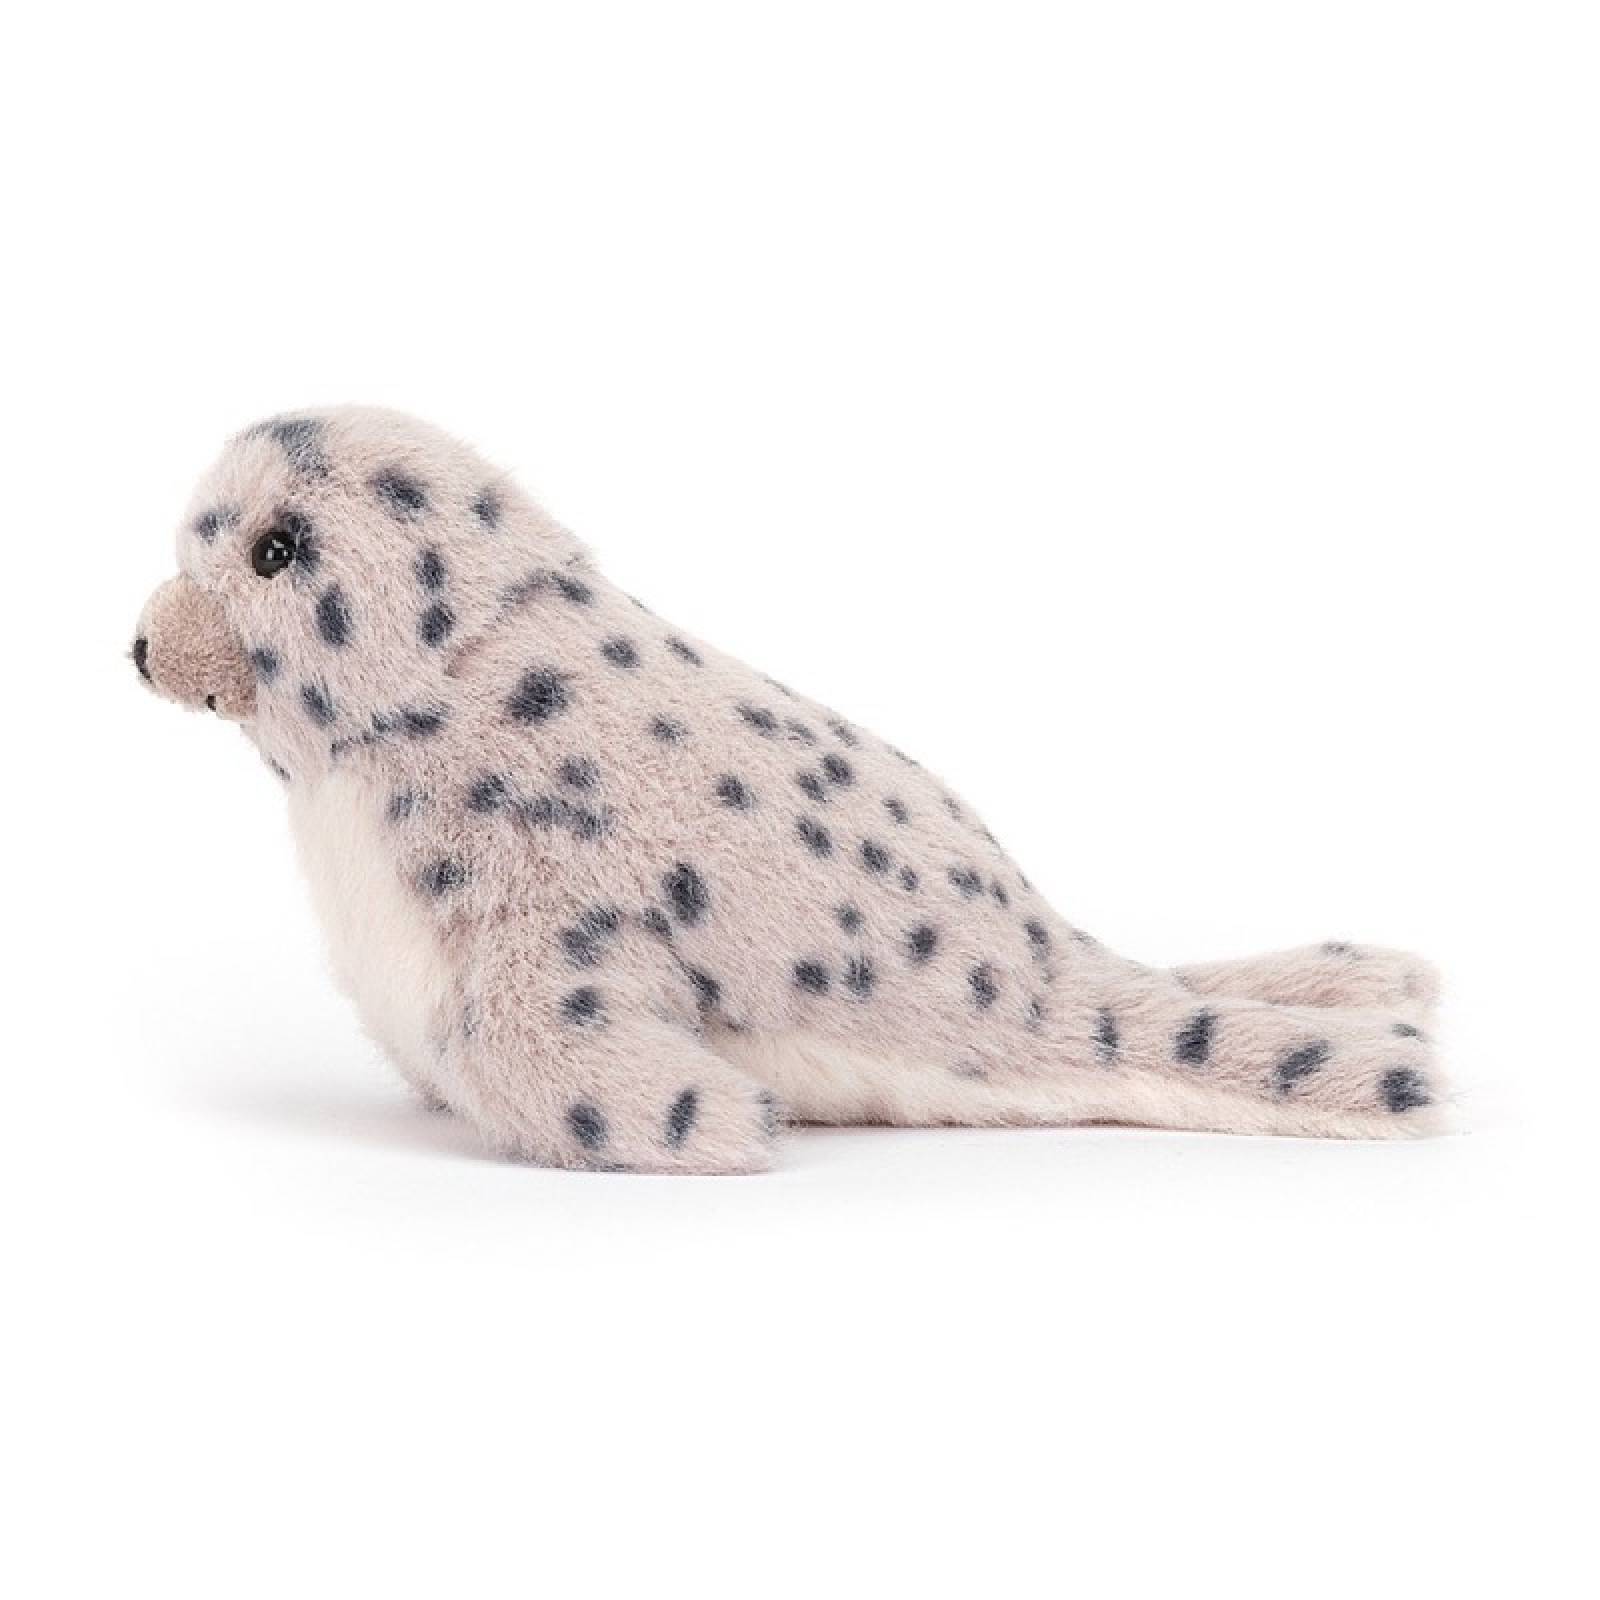 Nauticool Spotty Seal Soft Toy By Jellycat 0+ thumbnails